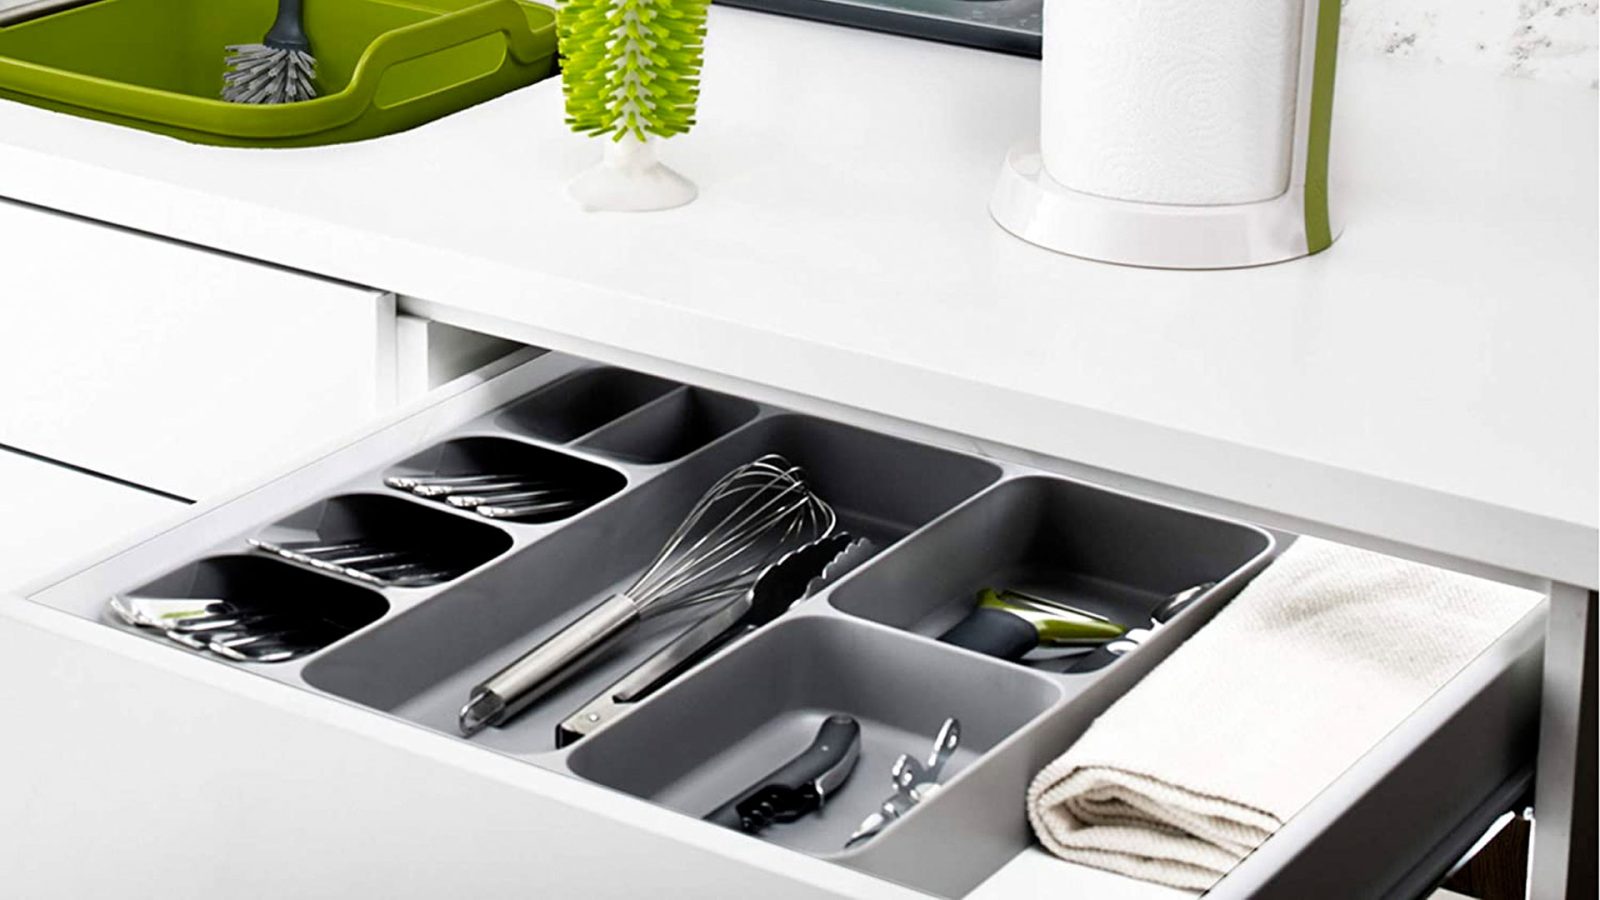 Tidy up your kitchen with Joseph Joseph drawer organizers from 7